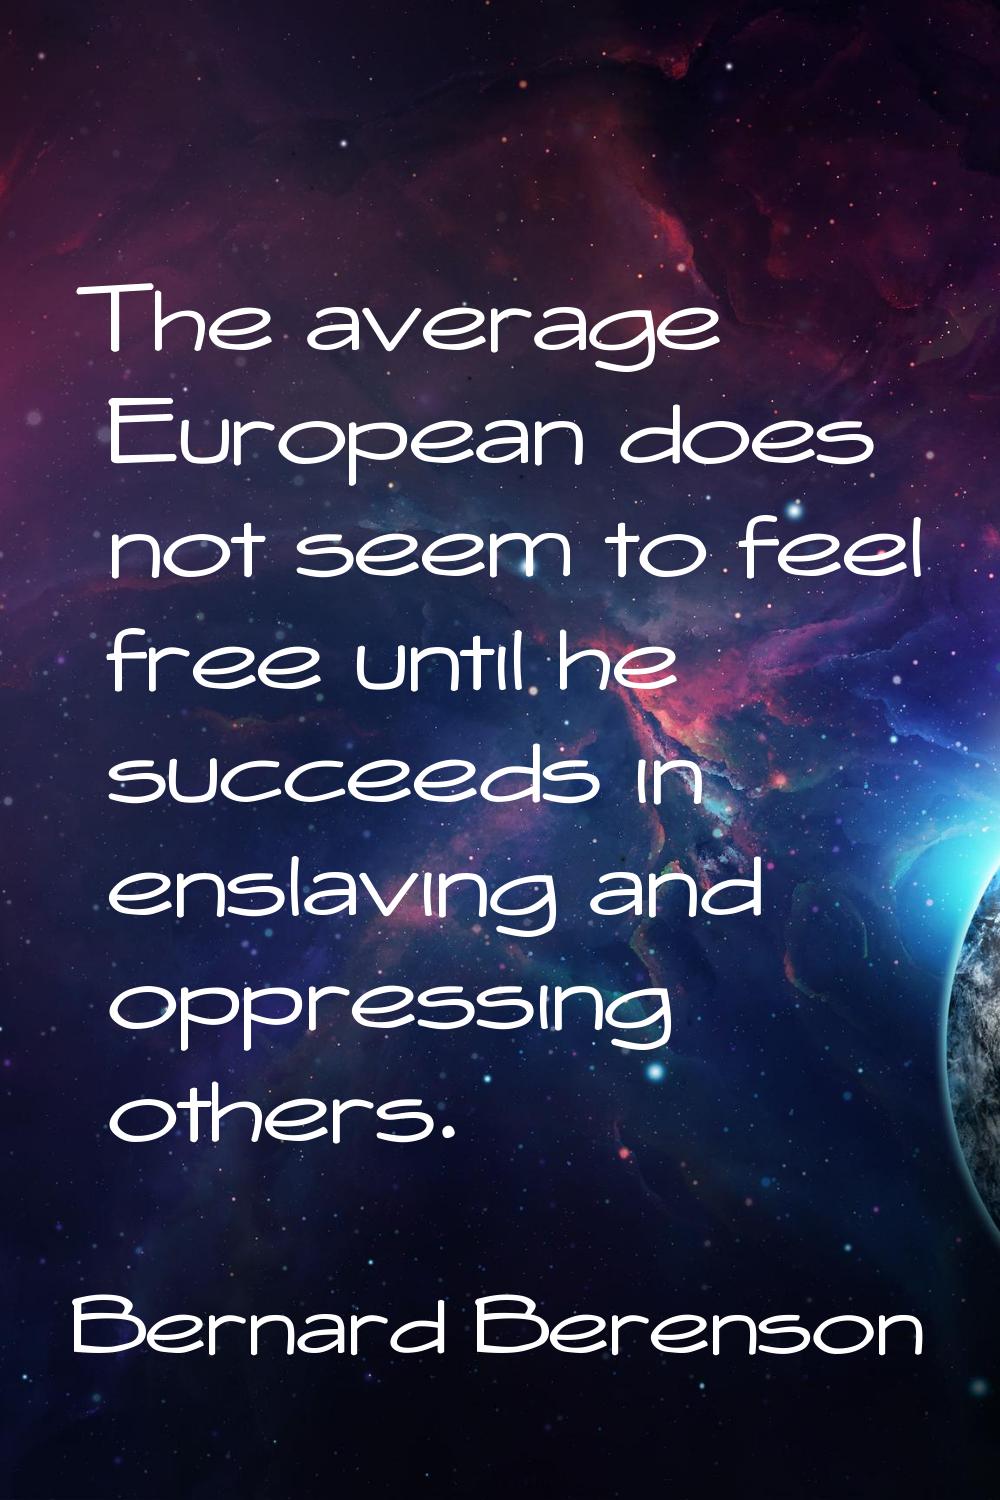 The average European does not seem to feel free until he succeeds in enslaving and oppressing other